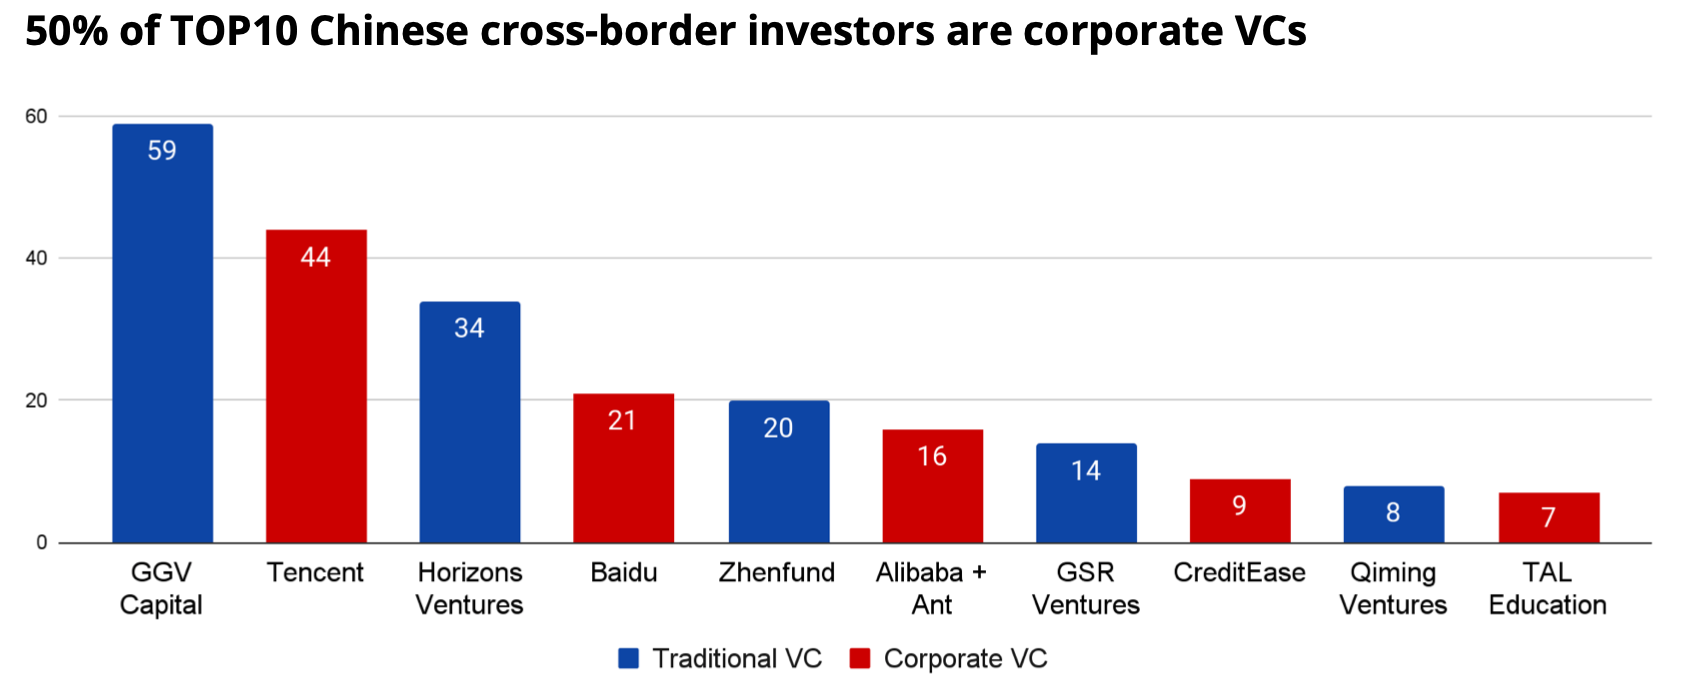 Top 10 most active Chinese VCs investing outside China, by # of deals (2012-2021)